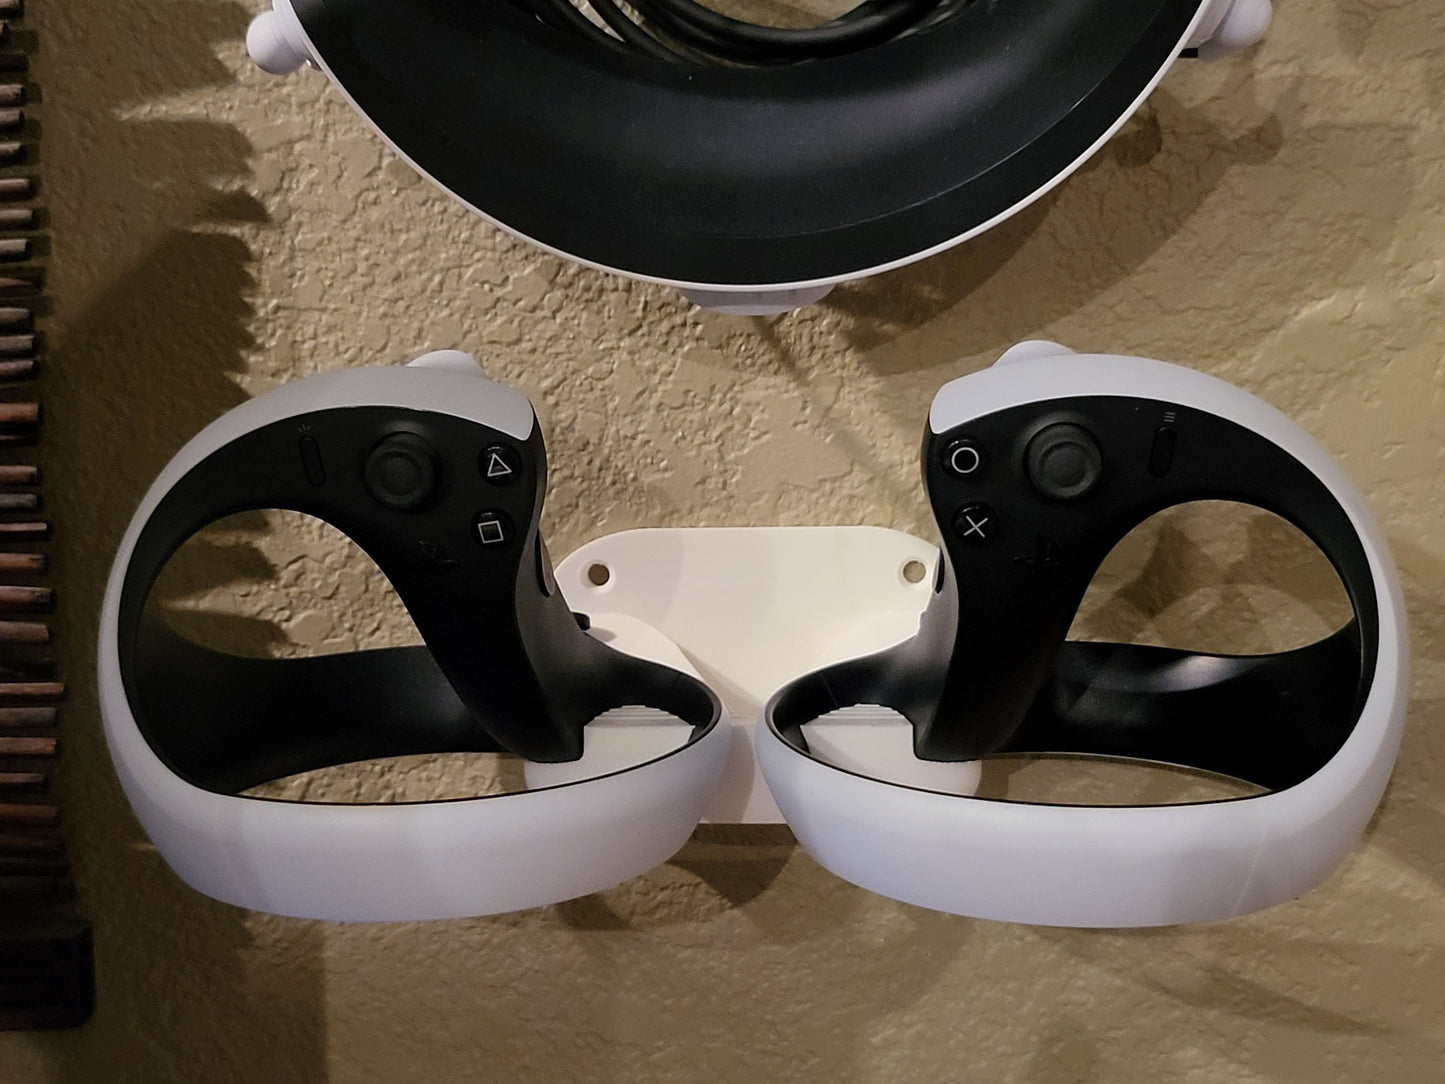 PSVR2 Wall Mount  - No Damage Command Strips or Screw Anchor Versions Available.